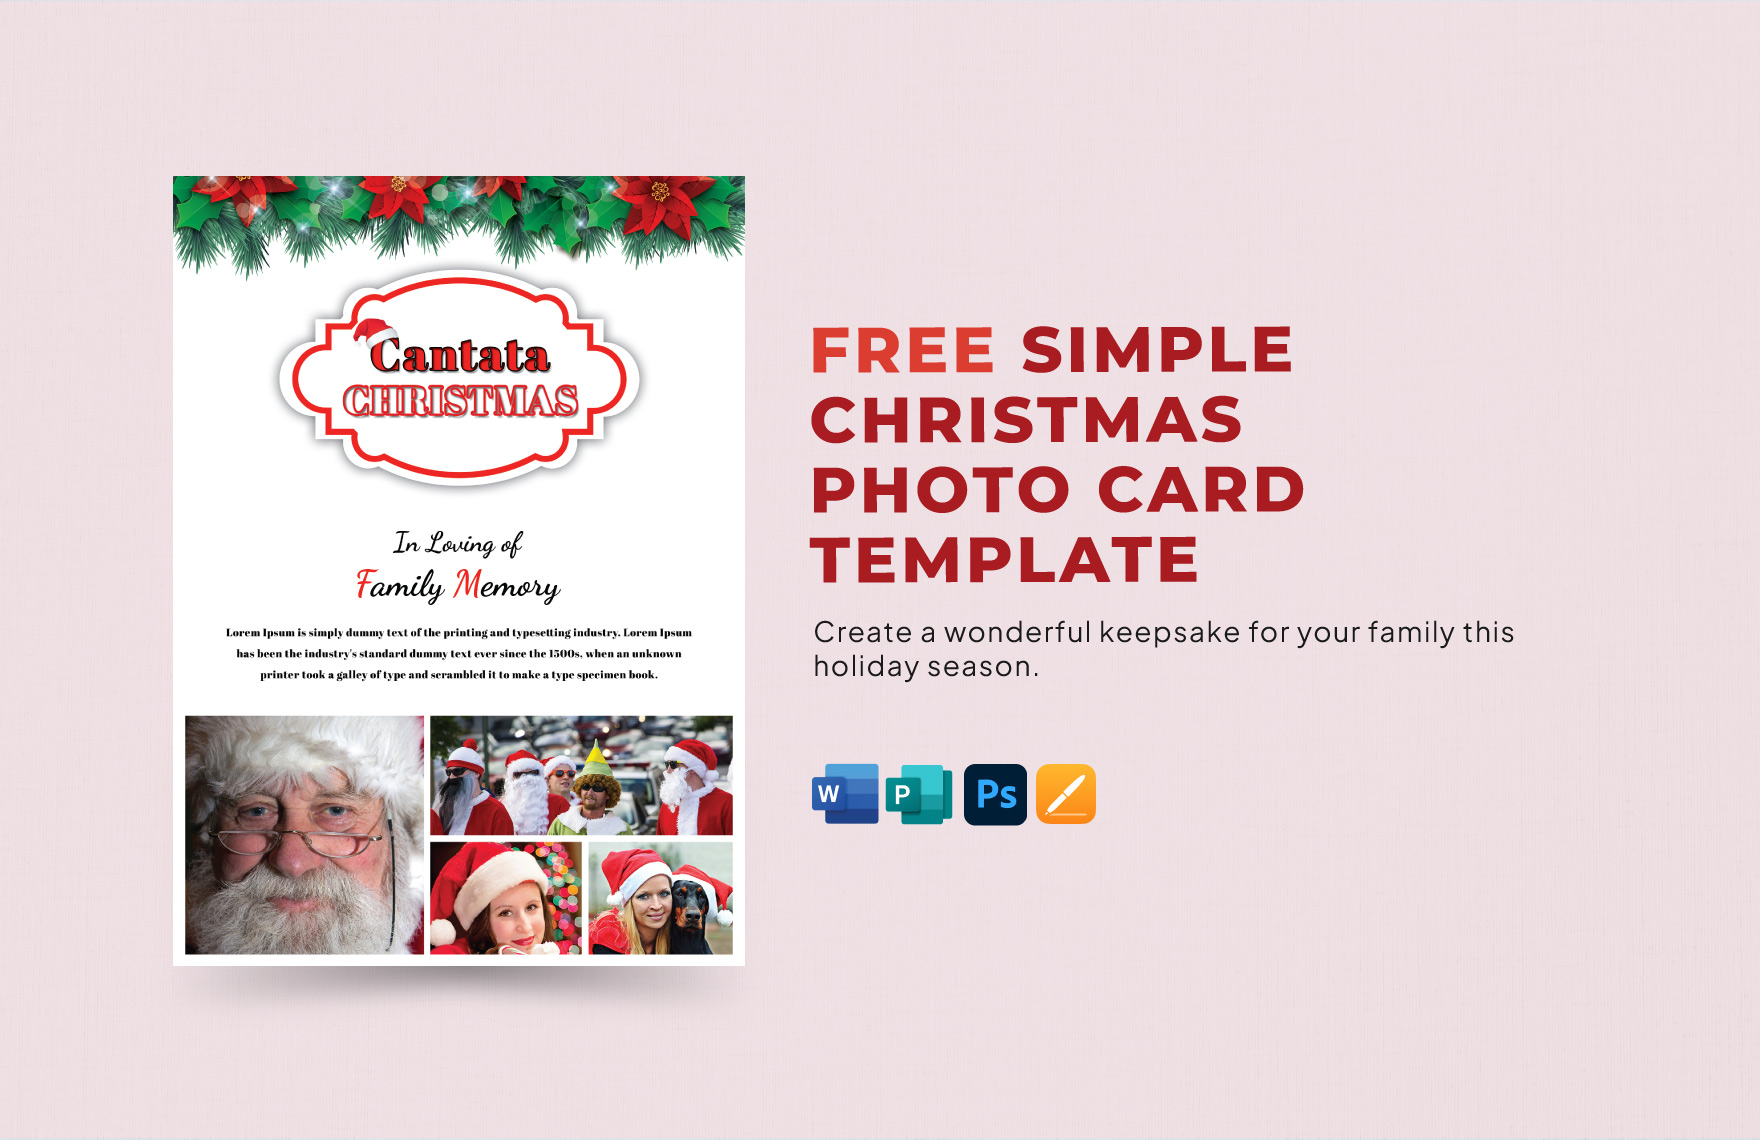 Free Simple Christmas Photo Card Template in Word, PSD, Apple Pages, Publisher